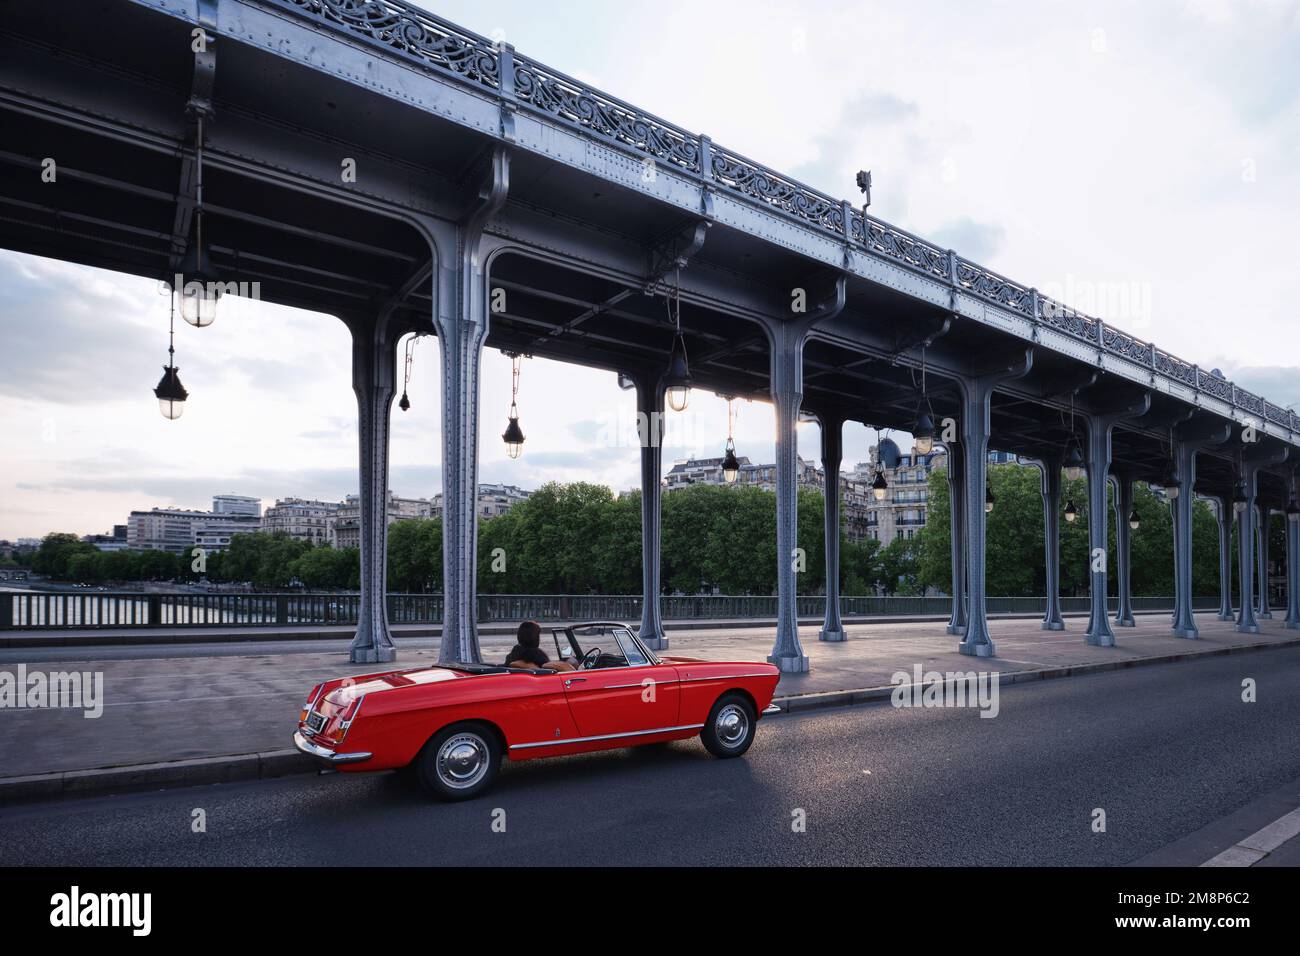 Paris, France - May, 2022: A red clasical sport car with long steel columns of Passy Viaduct located at Pont de Bir Hakeim Bridge Stock Photo